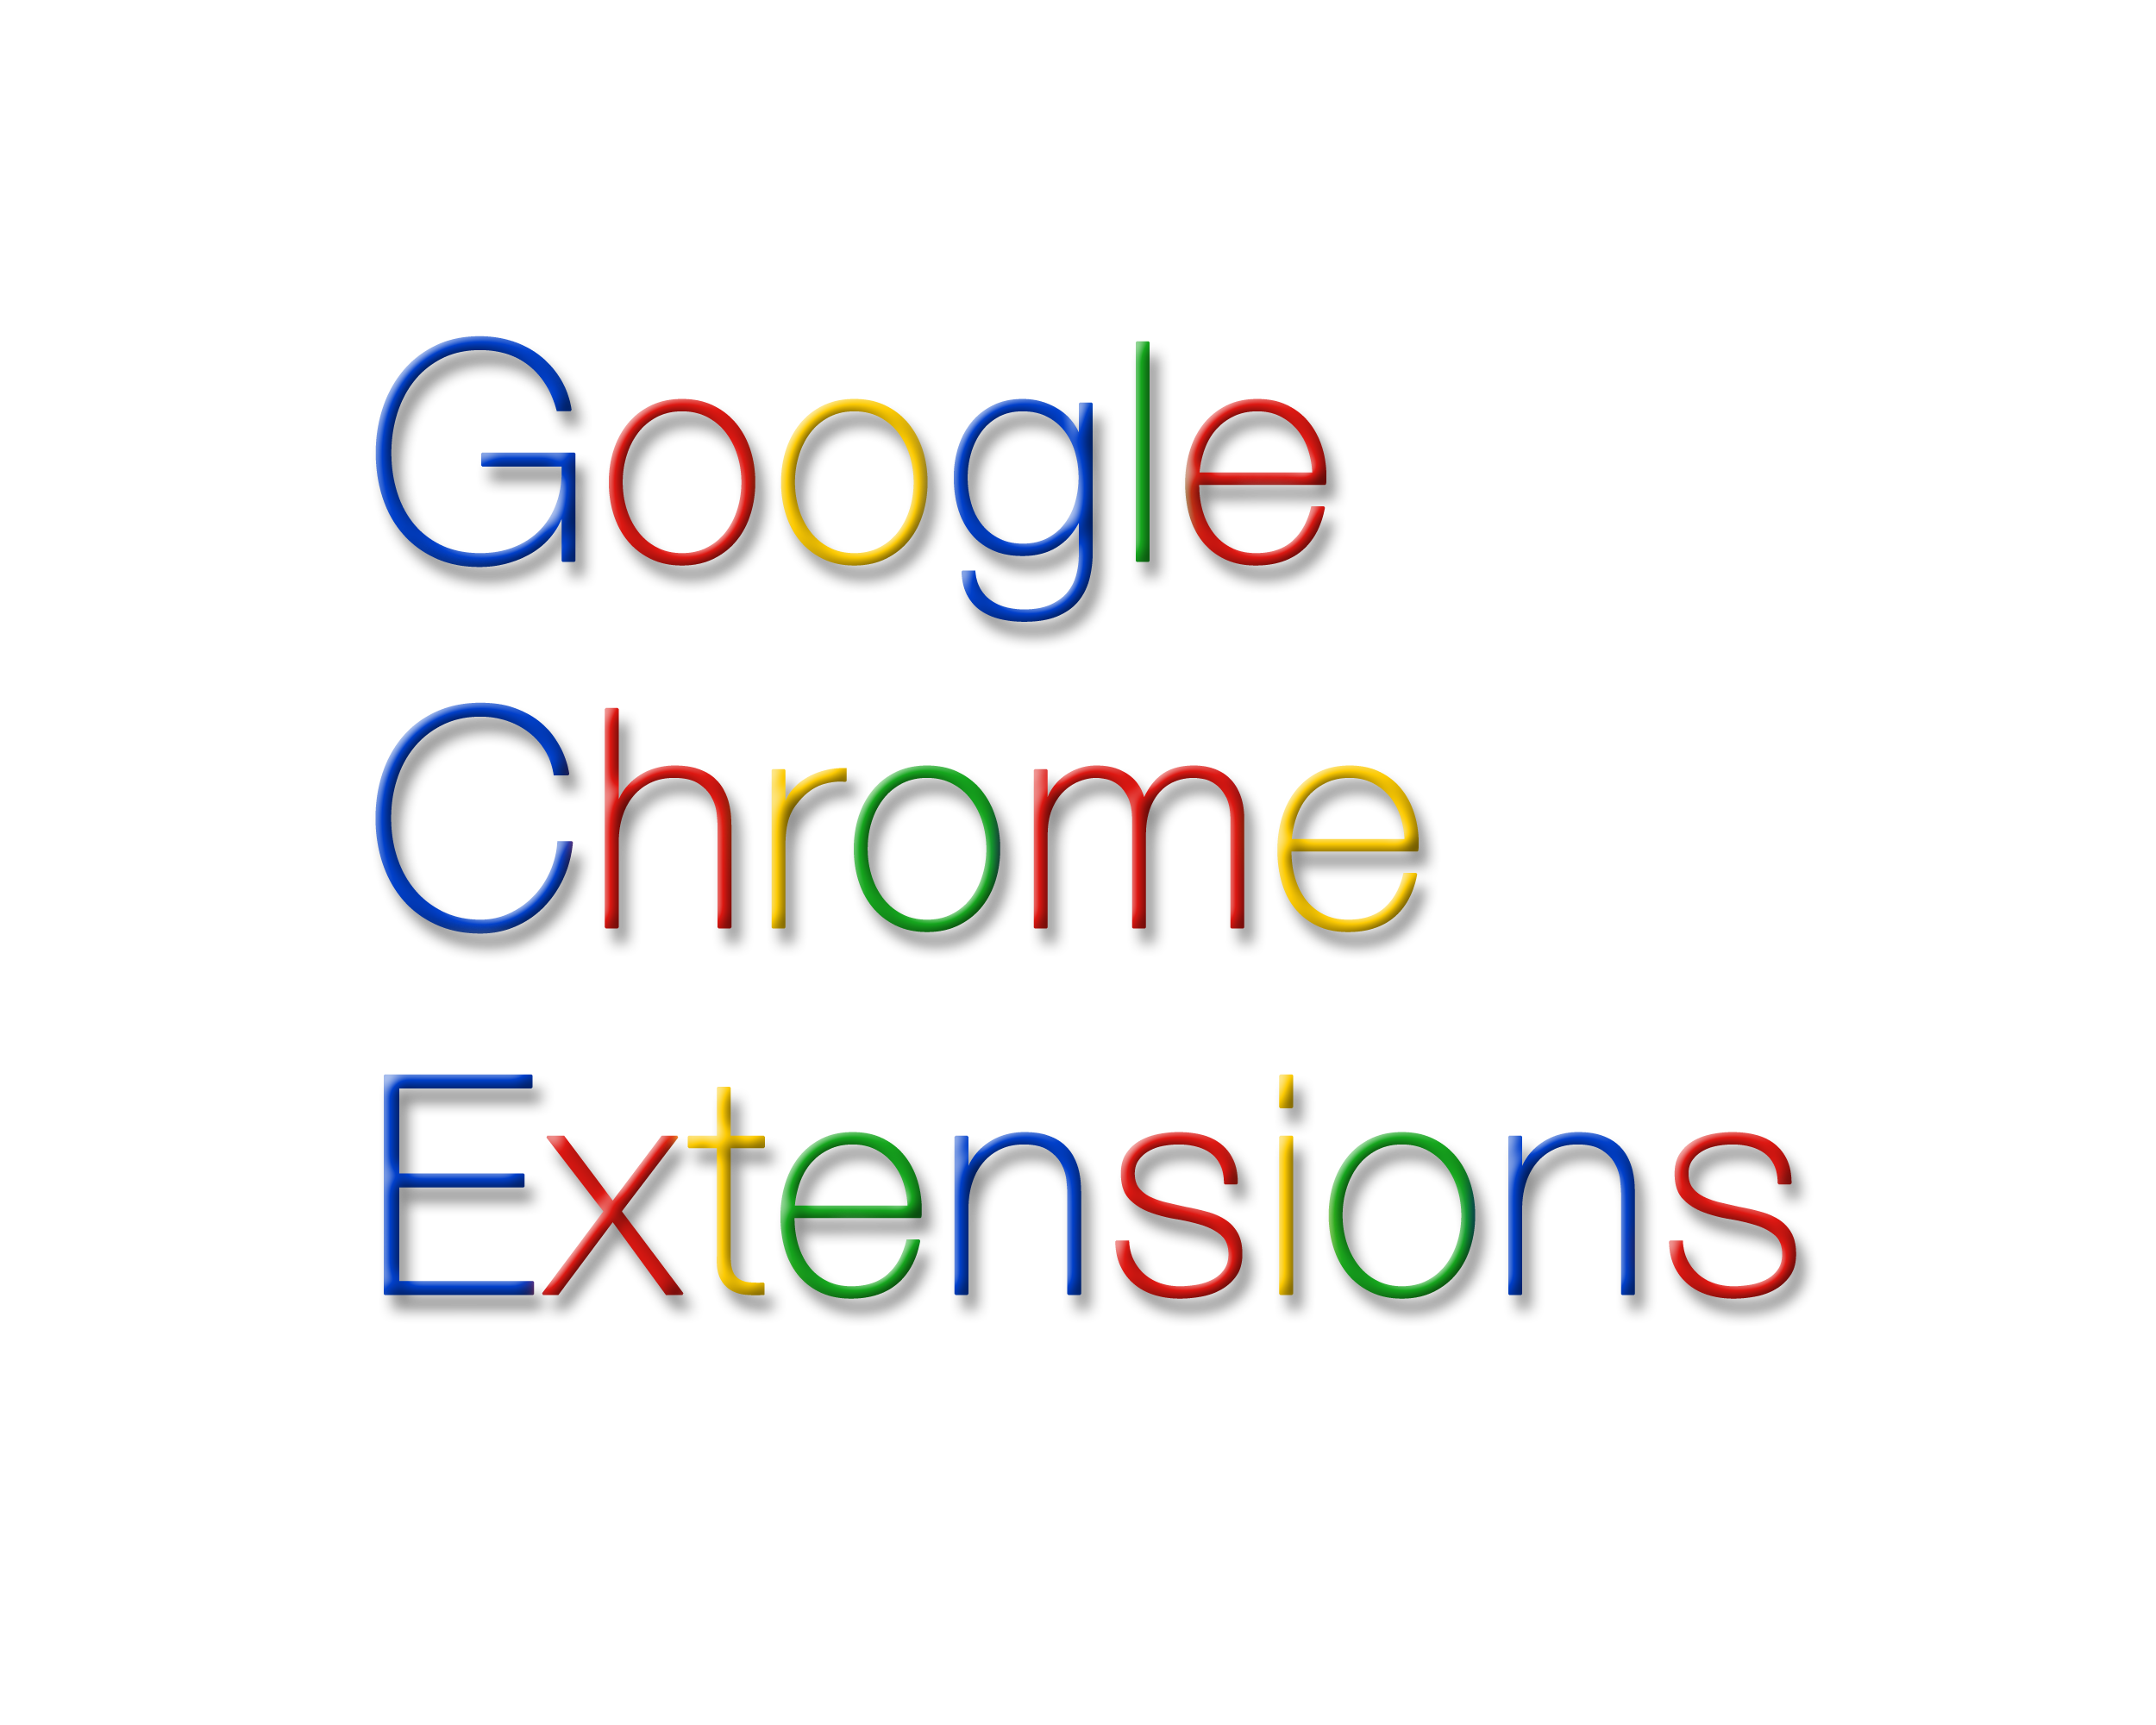 6 Google Chrome Extensions You MUST Have Right Now!